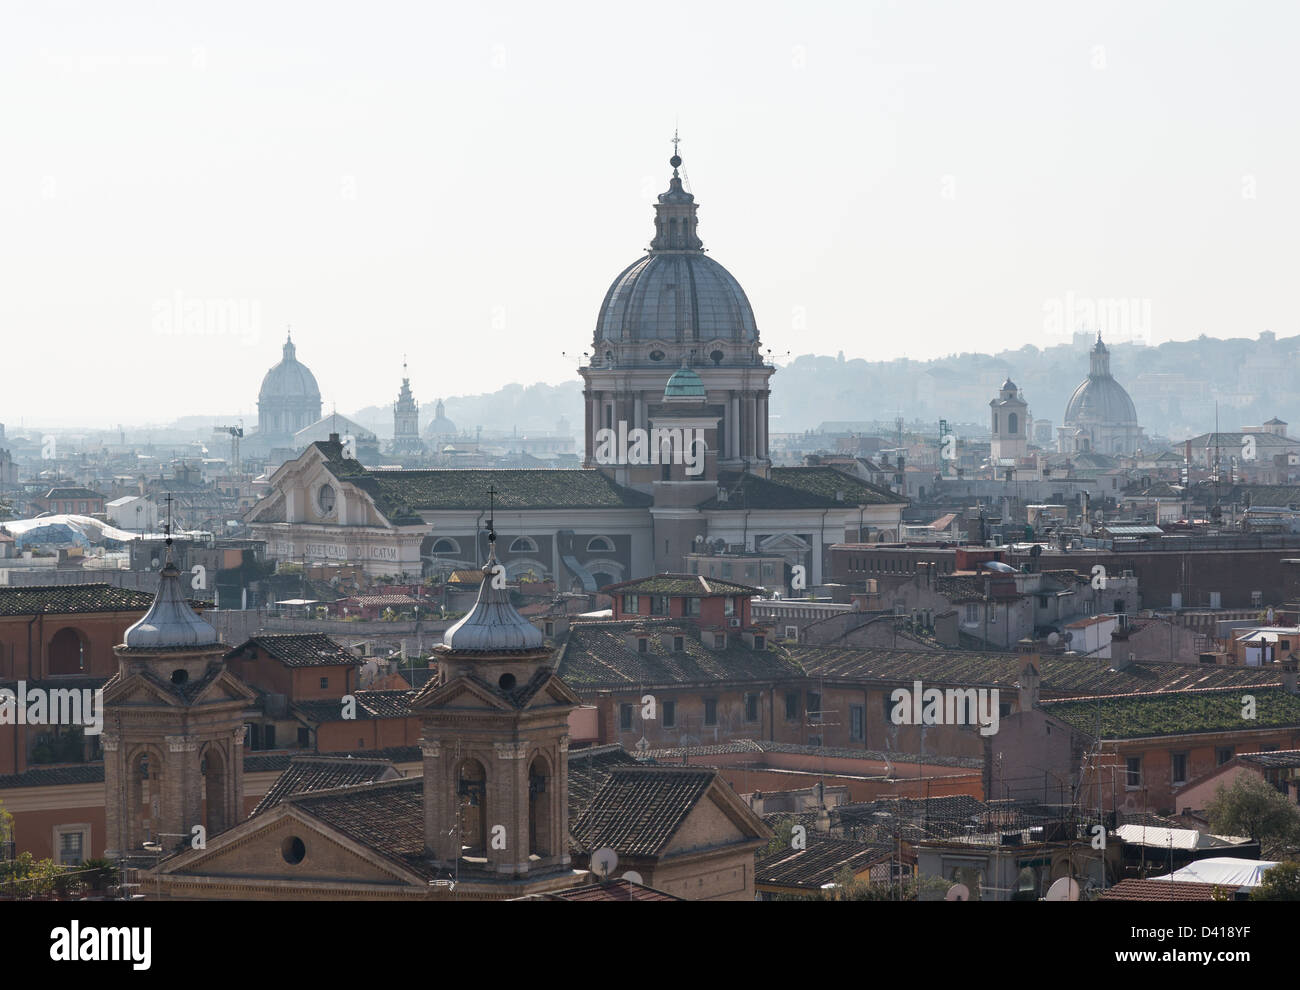 Basilica church of San Carlo al Corso in the skyline of Rome Italy with smog in the distance Stock Photo